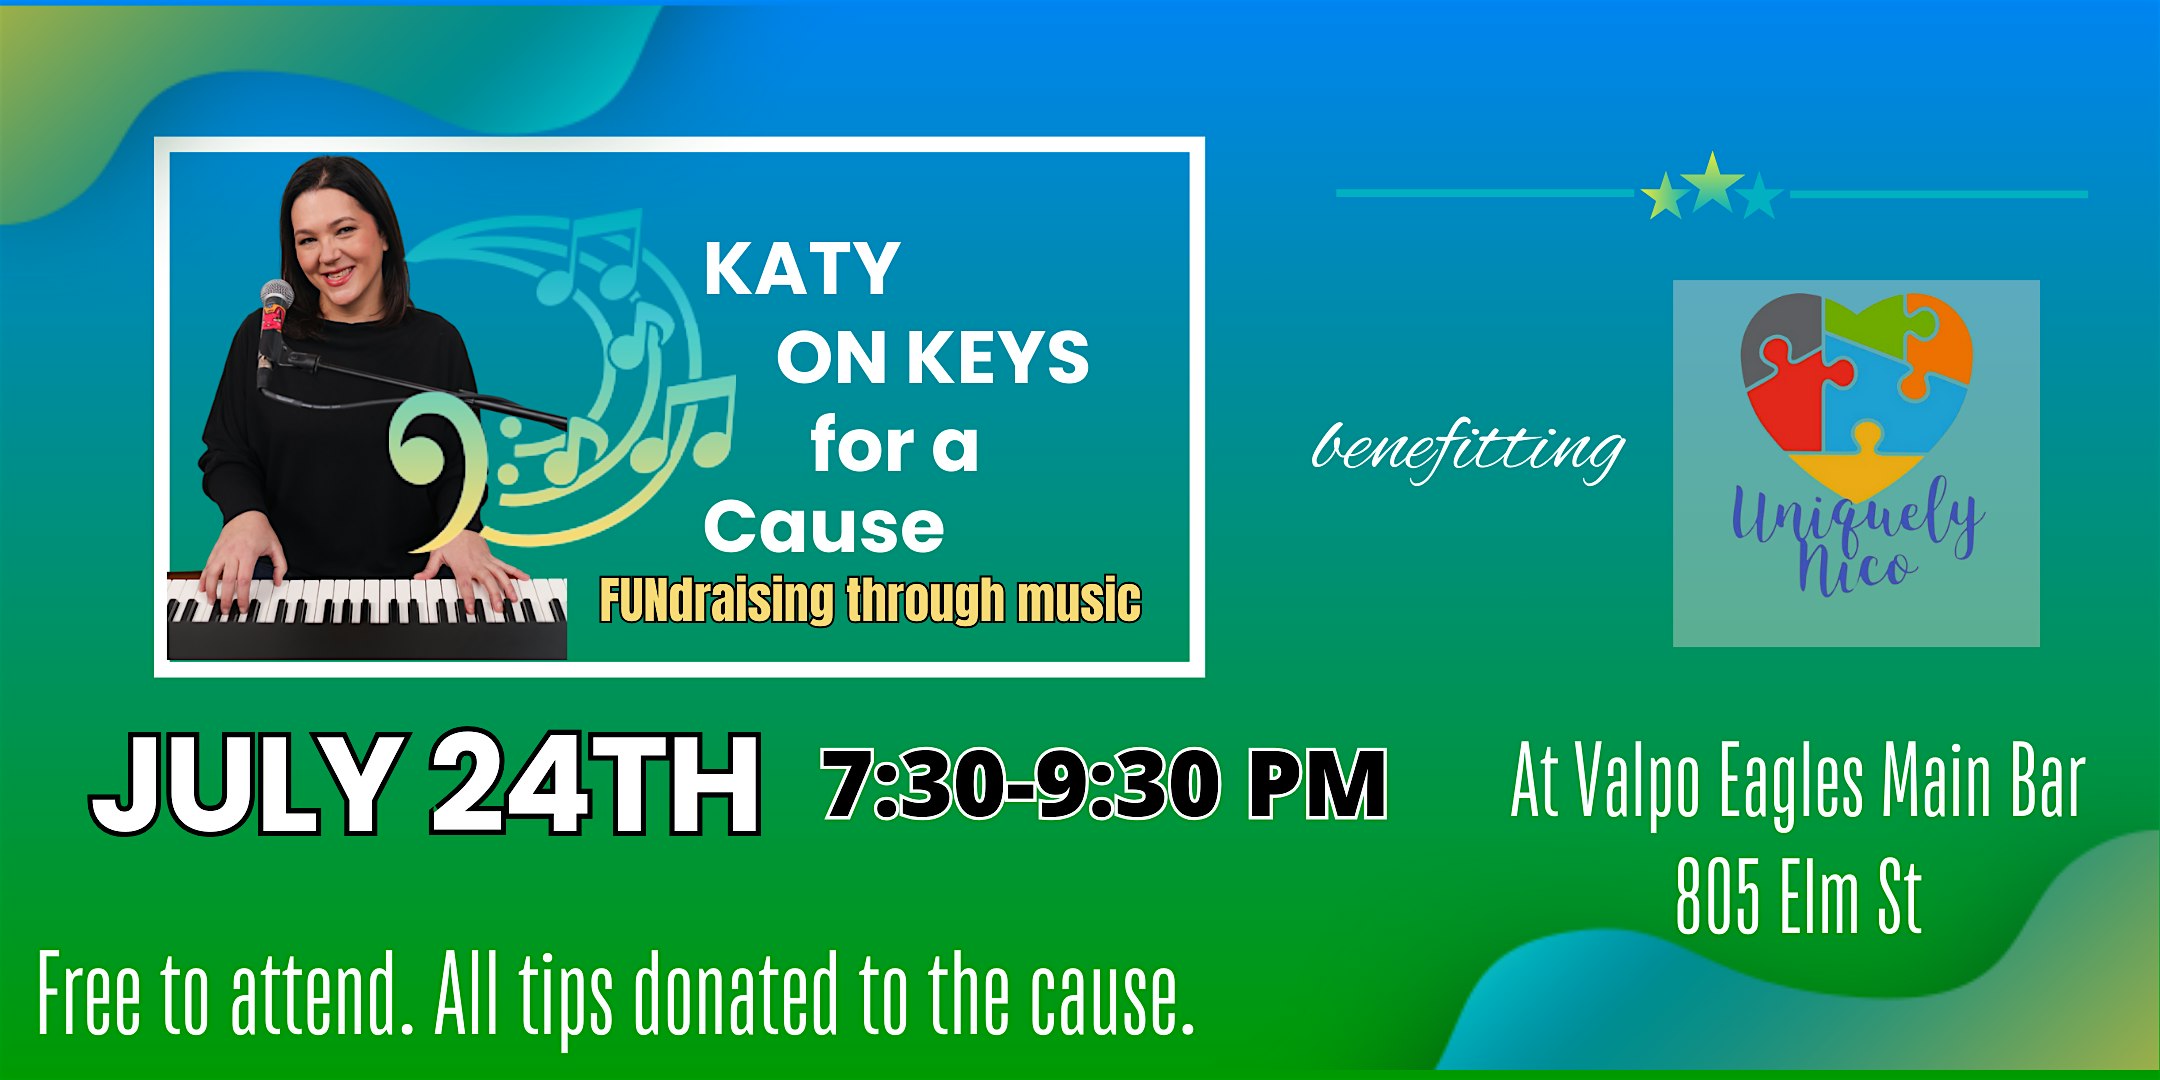 Katy on Keys for a Cause